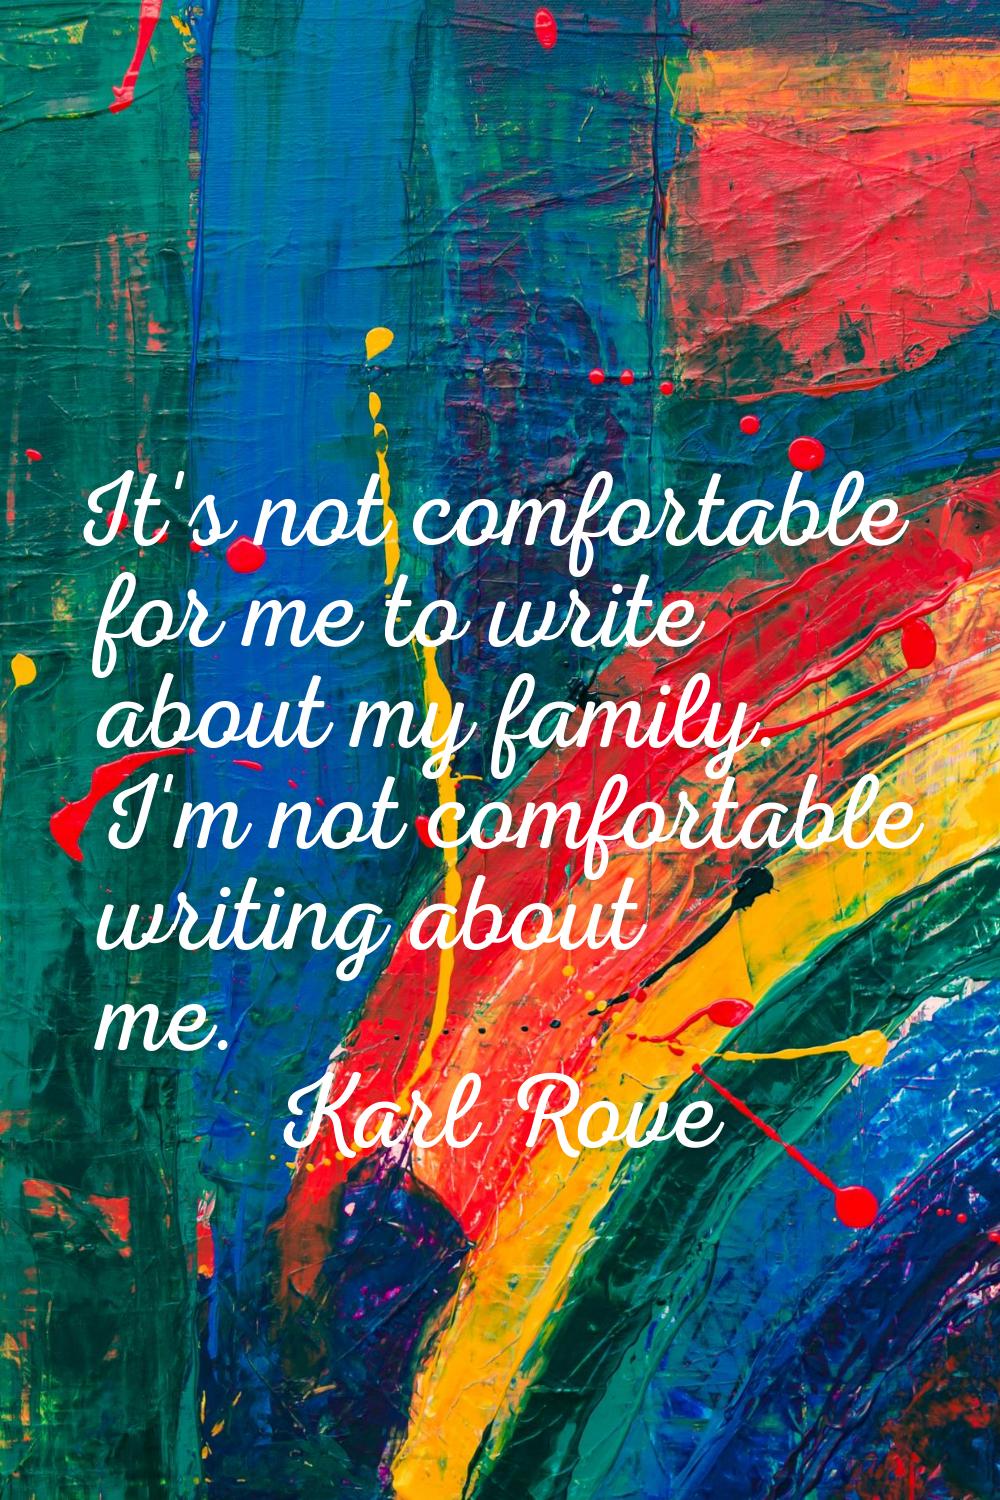 It's not comfortable for me to write about my family. I'm not comfortable writing about me.